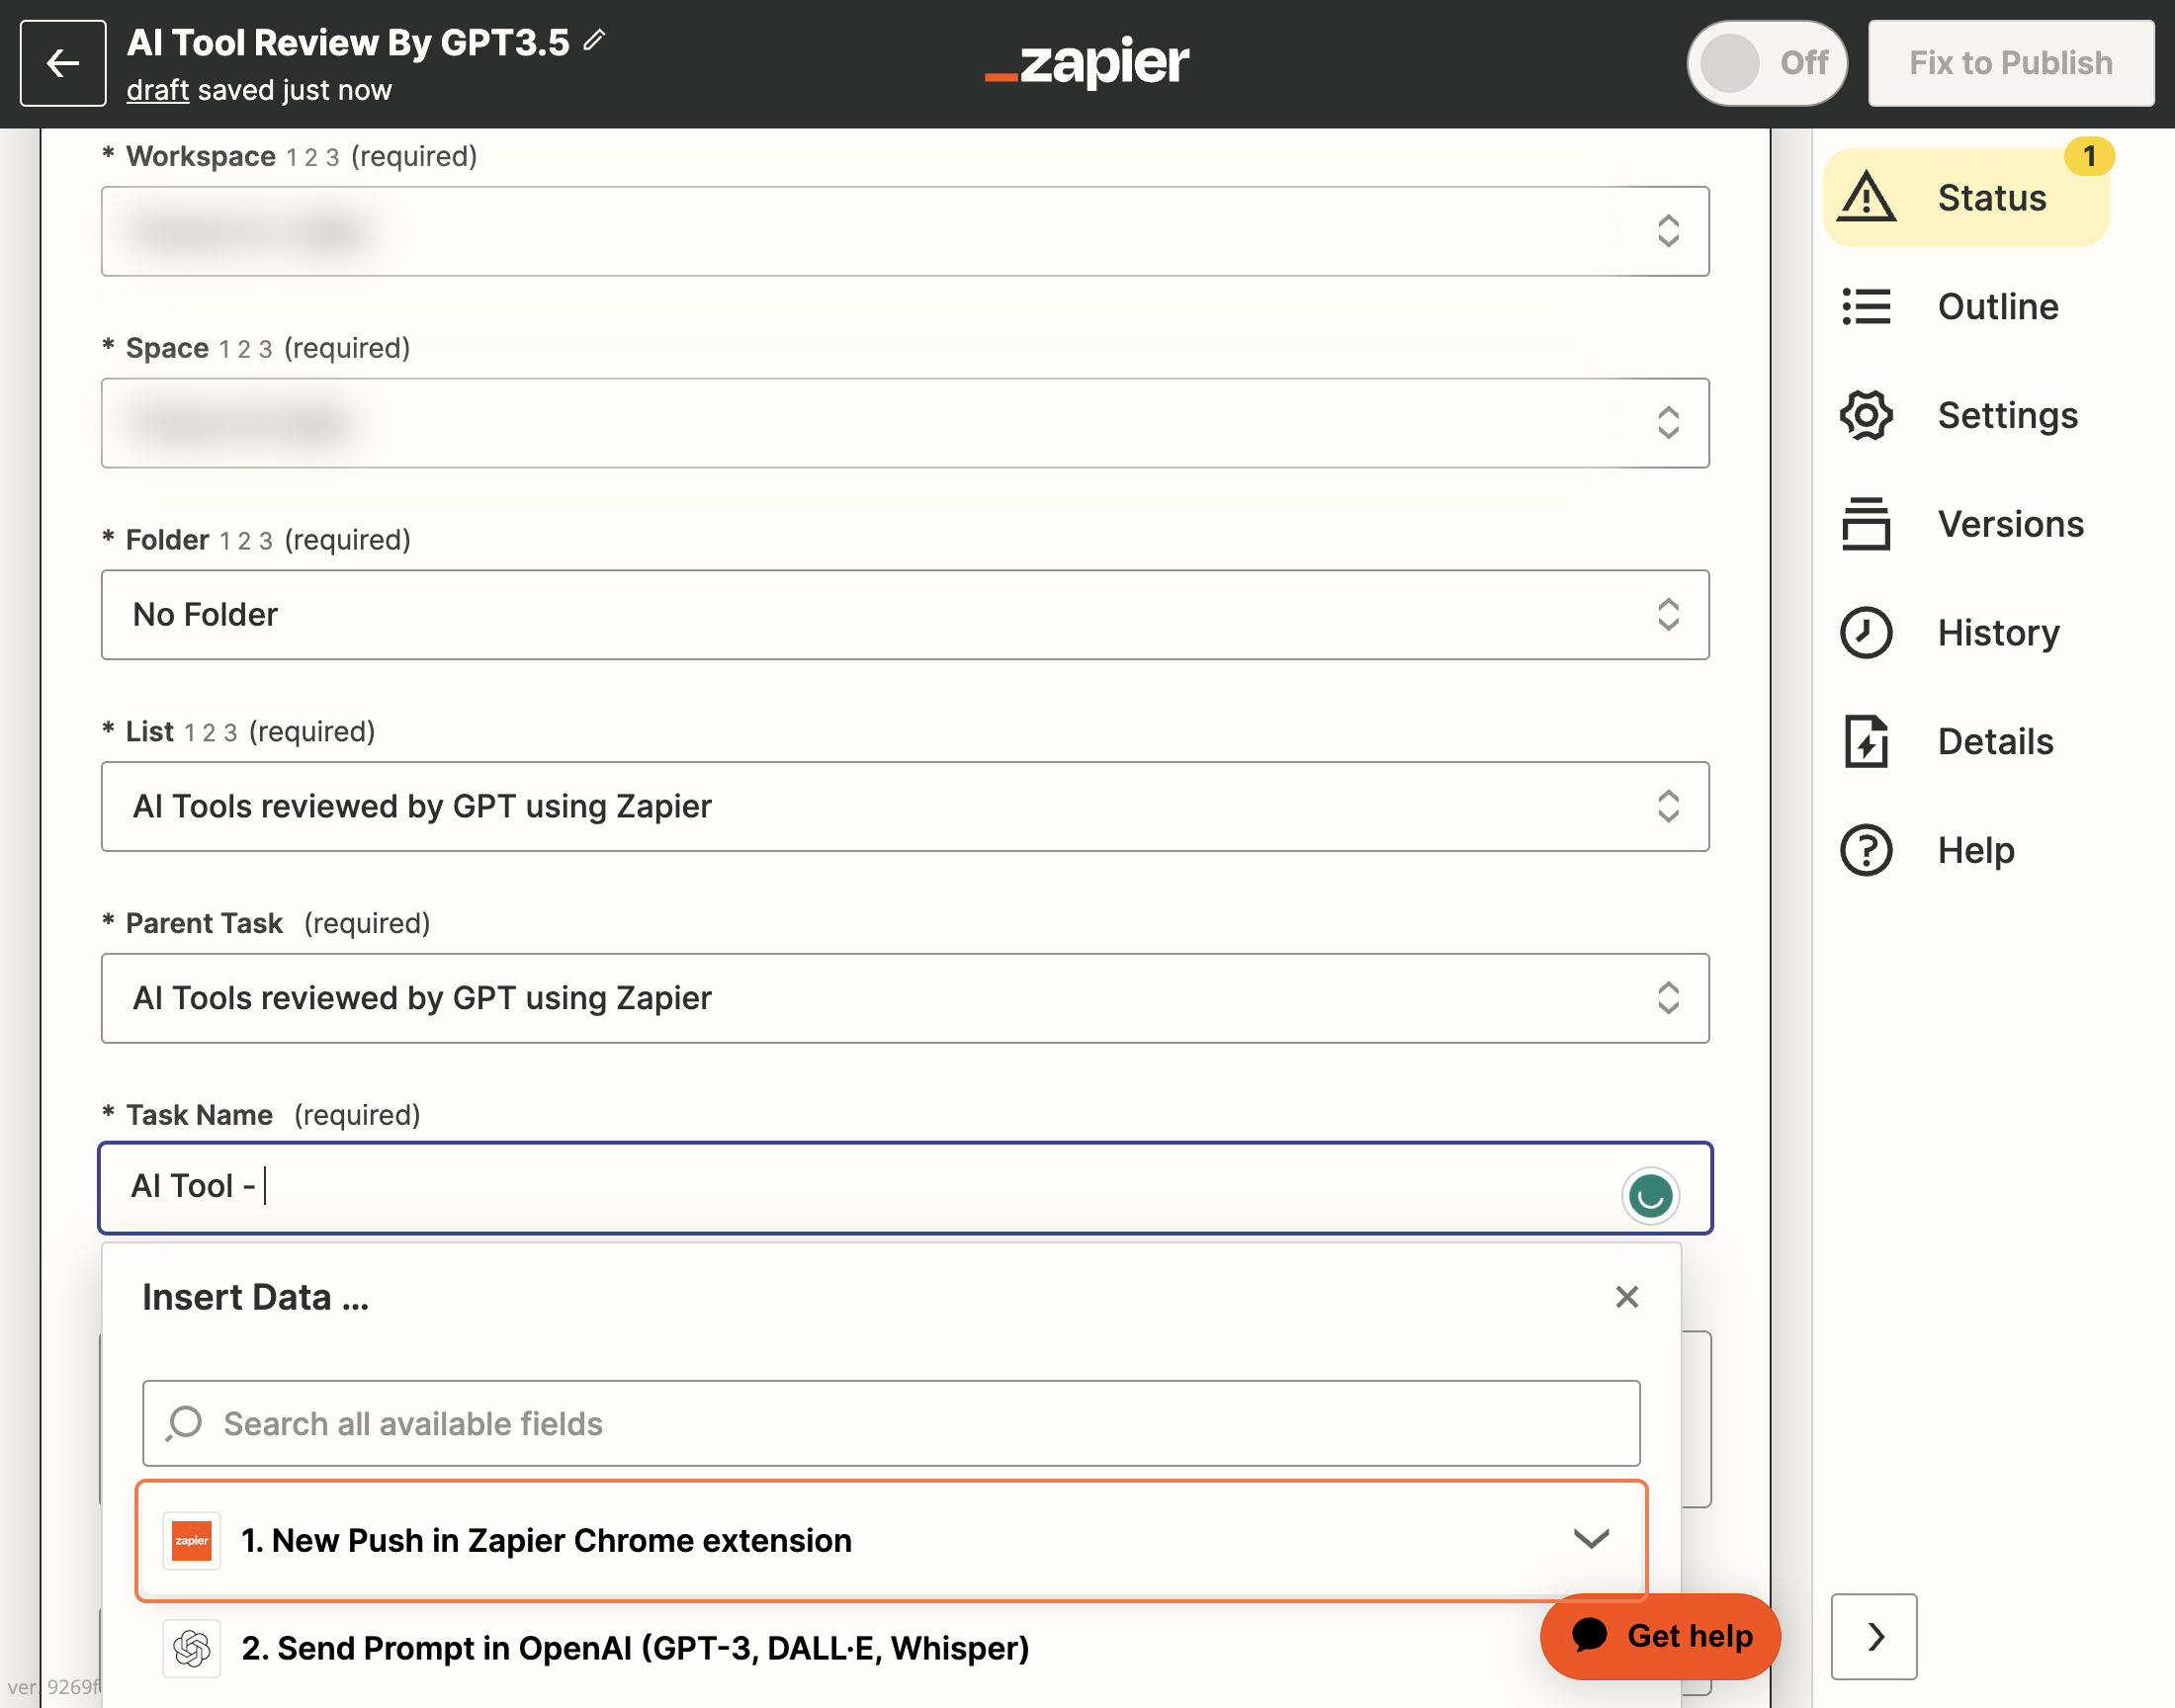 Click on 1. New Push in Zapier Chrome extension